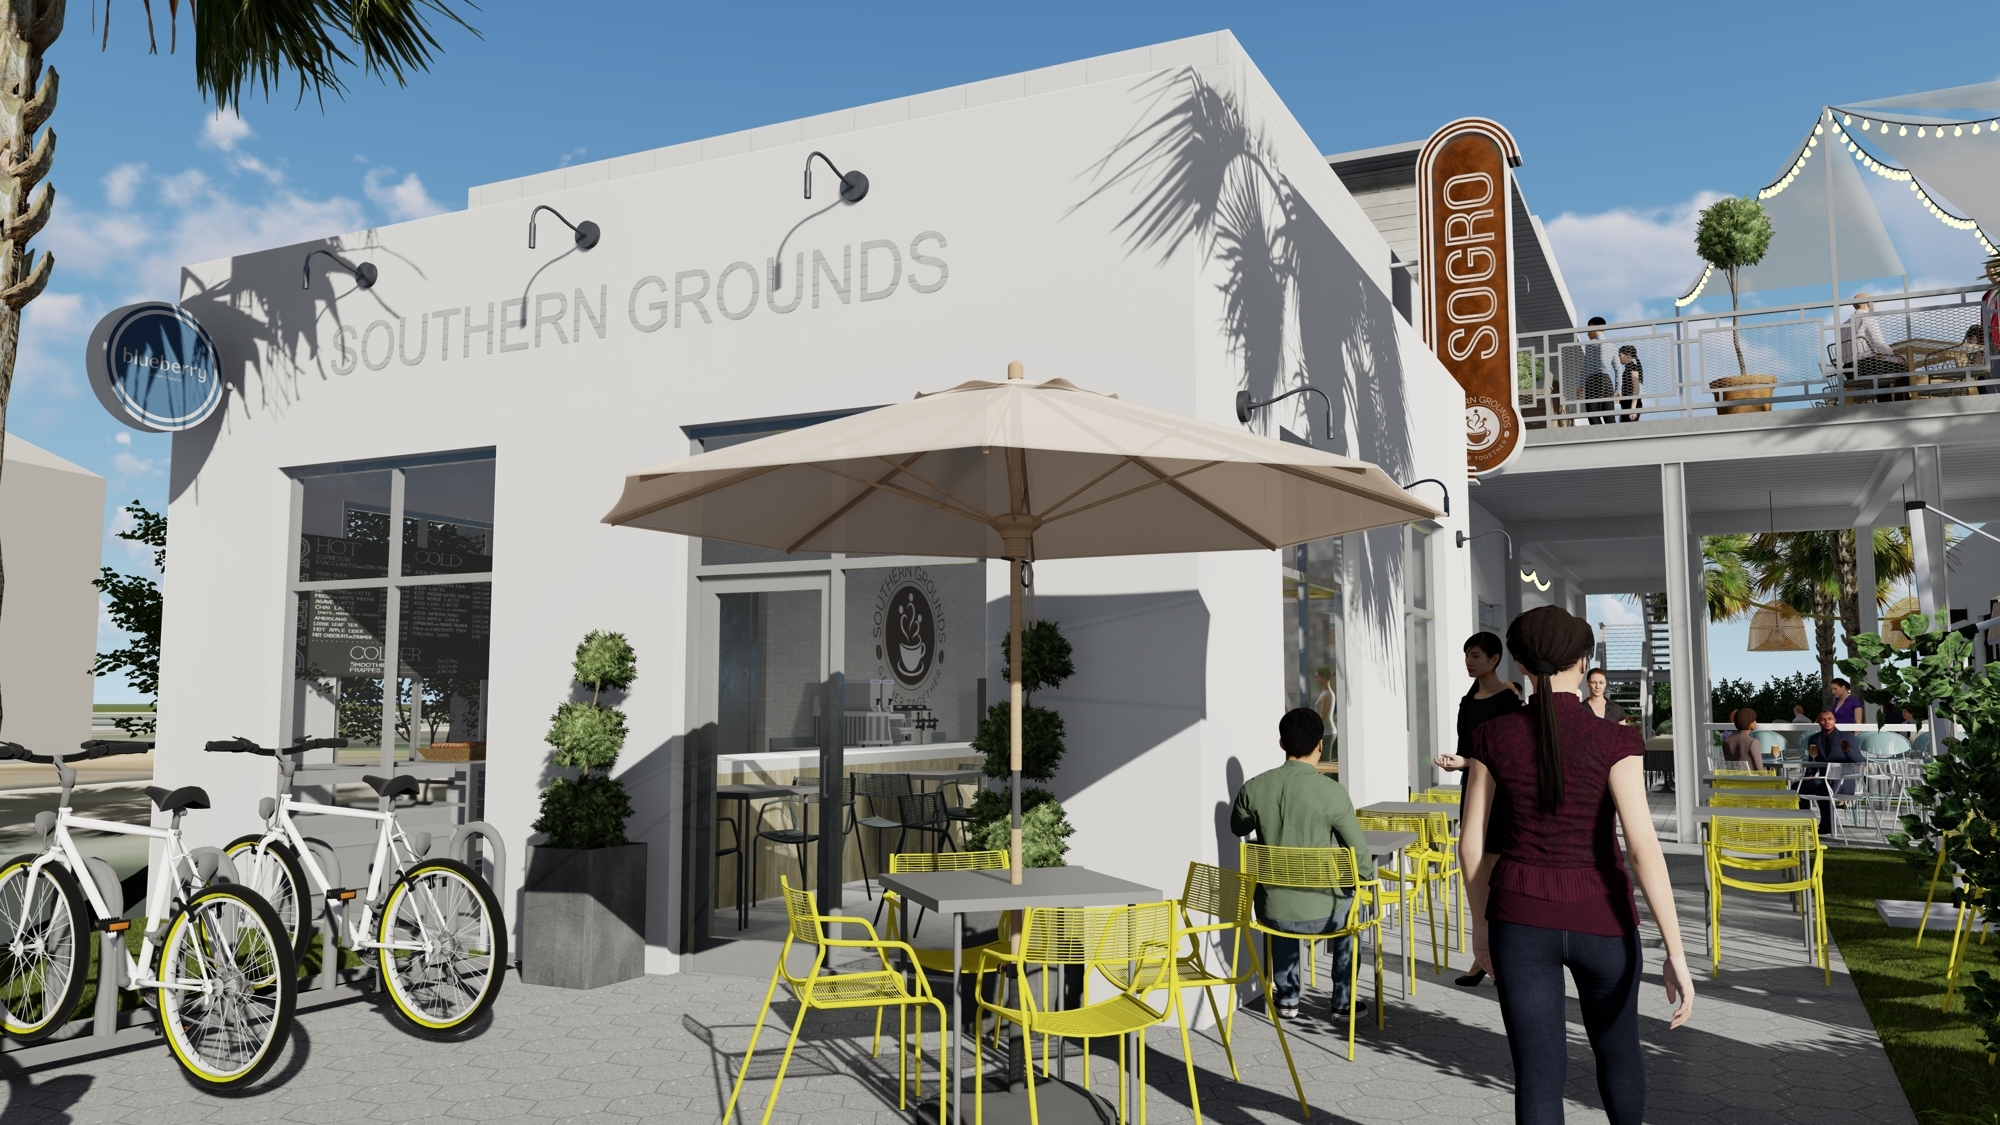 The project includes a Southern Grounds coffee shop and patio space.